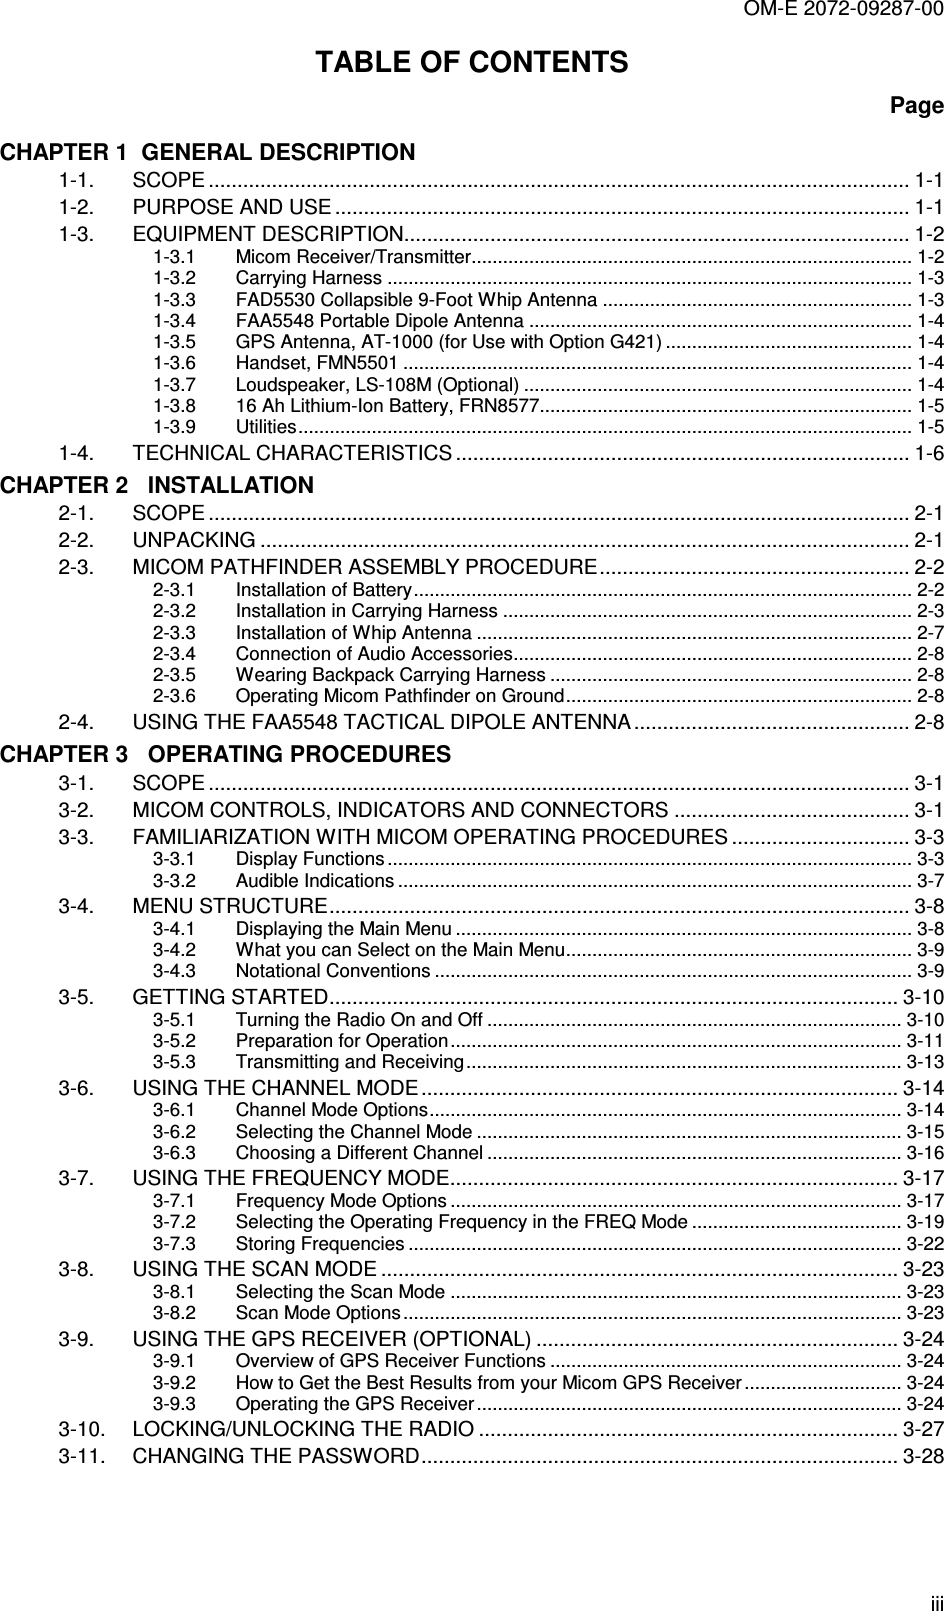 OM-E 2072-09287-00 iii TABLE OF CONTENTS Page CHAPTER 1  GENERAL DESCRIPTION 1-1. SCOPE .......................................................................................................................... 1-1 1-2. PURPOSE AND USE .................................................................................................... 1-1 1-3. EQUIPMENT DESCRIPTION........................................................................................ 1-2 1-3.1 Micom Receiver/Transmitter.................................................................................... 1-2 1-3.2 Carrying Harness .................................................................................................... 1-3 1-3.3 FAD5530 Collapsible 9-Foot Whip Antenna ........................................................... 1-3 1-3.4 FAA5548 Portable Dipole Antenna ......................................................................... 1-4 1-3.5 GPS Antenna, AT-1000 (for Use with Option G421) ............................................... 1-4 1-3.6 Handset, FMN5501 ................................................................................................. 1-4 1-3.7 Loudspeaker, LS-108M (Optional) .......................................................................... 1-4 1-3.8 16 Ah Lithium-Ion Battery, FRN8577....................................................................... 1-5 1-3.9 Utilities..................................................................................................................... 1-5 1-4. TECHNICAL CHARACTERISTICS ............................................................................... 1-6 CHAPTER 2   INSTALLATION 2-1. SCOPE .......................................................................................................................... 2-1 2-2. UNPACKING ................................................................................................................. 2-1 2-3. MICOM PATHFINDER ASSEMBLY PROCEDURE...................................................... 2-2 2-3.1 Installation of Battery............................................................................................... 2-2 2-3.2 Installation in Carrying Harness .............................................................................. 2-3 2-3.3 Installation of Whip Antenna ................................................................................... 2-7 2-3.4 Connection of Audio Accessories............................................................................ 2-8 2-3.5 Wearing Backpack Carrying Harness ..................................................................... 2-8 2-3.6 Operating Micom Pathfinder on Ground.................................................................. 2-8 2-4. USING THE FAA5548 TACTICAL DIPOLE ANTENNA................................................ 2-8 CHAPTER 3   OPERATING PROCEDURES 3-1. SCOPE .......................................................................................................................... 3-1 3-2. MICOM CONTROLS, INDICATORS AND CONNECTORS ......................................... 3-1 3-3. FAMILIARIZATION WITH MICOM OPERATING PROCEDURES ............................... 3-3 3-3.1 Display Functions .................................................................................................... 3-3 3-3.2 Audible Indications .................................................................................................. 3-7 3-4. MENU STRUCTURE..................................................................................................... 3-8 3-4.1 Displaying the Main Menu ....................................................................................... 3-8 3-4.2 What you can Select on the Main Menu.................................................................. 3-9 3-4.3 Notational Conventions ........................................................................................... 3-9 3-5. GETTING STARTED................................................................................................... 3-10 3-5.1 Turning the Radio On and Off ............................................................................... 3-10 3-5.2 Preparation for Operation ...................................................................................... 3-11 3-5.3 Transmitting and Receiving................................................................................... 3-13 3-6. USING THE CHANNEL MODE ................................................................................... 3-14 3-6.1 Channel Mode Options.......................................................................................... 3-14 3-6.2 Selecting the Channel Mode ................................................................................. 3-15 3-6.3 Choosing a Different Channel ............................................................................... 3-16 3-7. USING THE FREQUENCY MODE.............................................................................. 3-17 3-7.1 Frequency Mode Options ...................................................................................... 3-17 3-7.2 Selecting the Operating Frequency in the FREQ Mode ........................................ 3-19 3-7.3 Storing Frequencies .............................................................................................. 3-22 3-8. USING THE SCAN MODE .......................................................................................... 3-23 3-8.1 Selecting the Scan Mode ...................................................................................... 3-23 3-8.2 Scan Mode Options............................................................................................... 3-23 3-9. USING THE GPS RECEIVER (OPTIONAL) ............................................................... 3-24 3-9.1 Overview of GPS Receiver Functions ................................................................... 3-24 3-9.2 How to Get the Best Results from your Micom GPS Receiver .............................. 3-24 3-9.3 Operating the GPS Receiver ................................................................................. 3-24 3-10. LOCKING/UNLOCKING THE RADIO ......................................................................... 3-27 3-11. CHANGING THE PASSWORD................................................................................... 3-28 